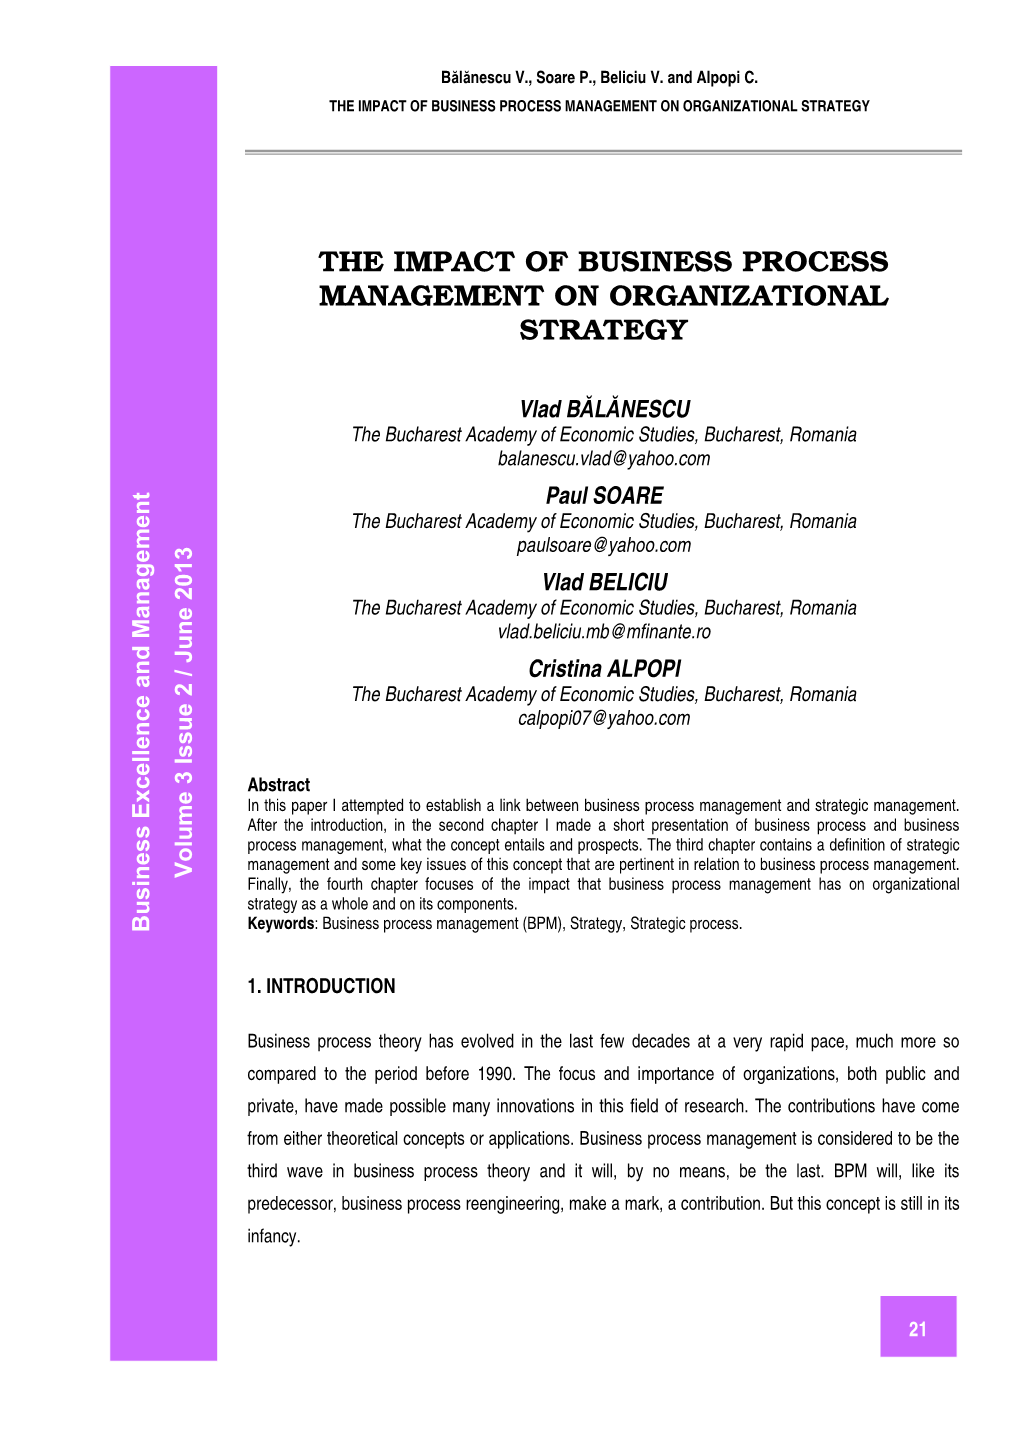 The Impact of Business Process Management on Organizational Strategy